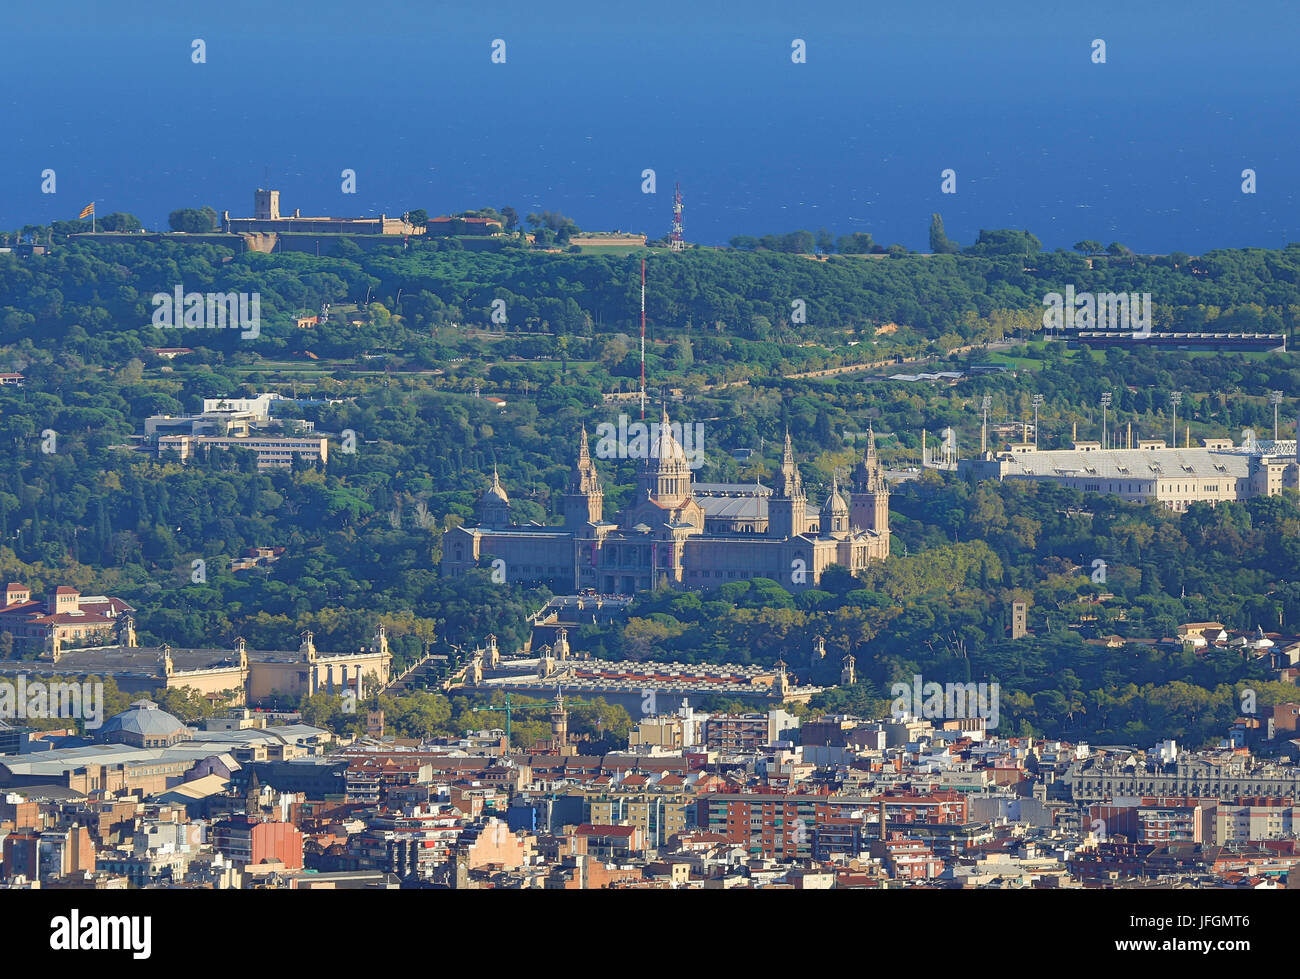 Spain, Catalunya, Barcelona City, Montjuich Hill, Montjuich fortress and Nationa Palace Building, Stock Photo